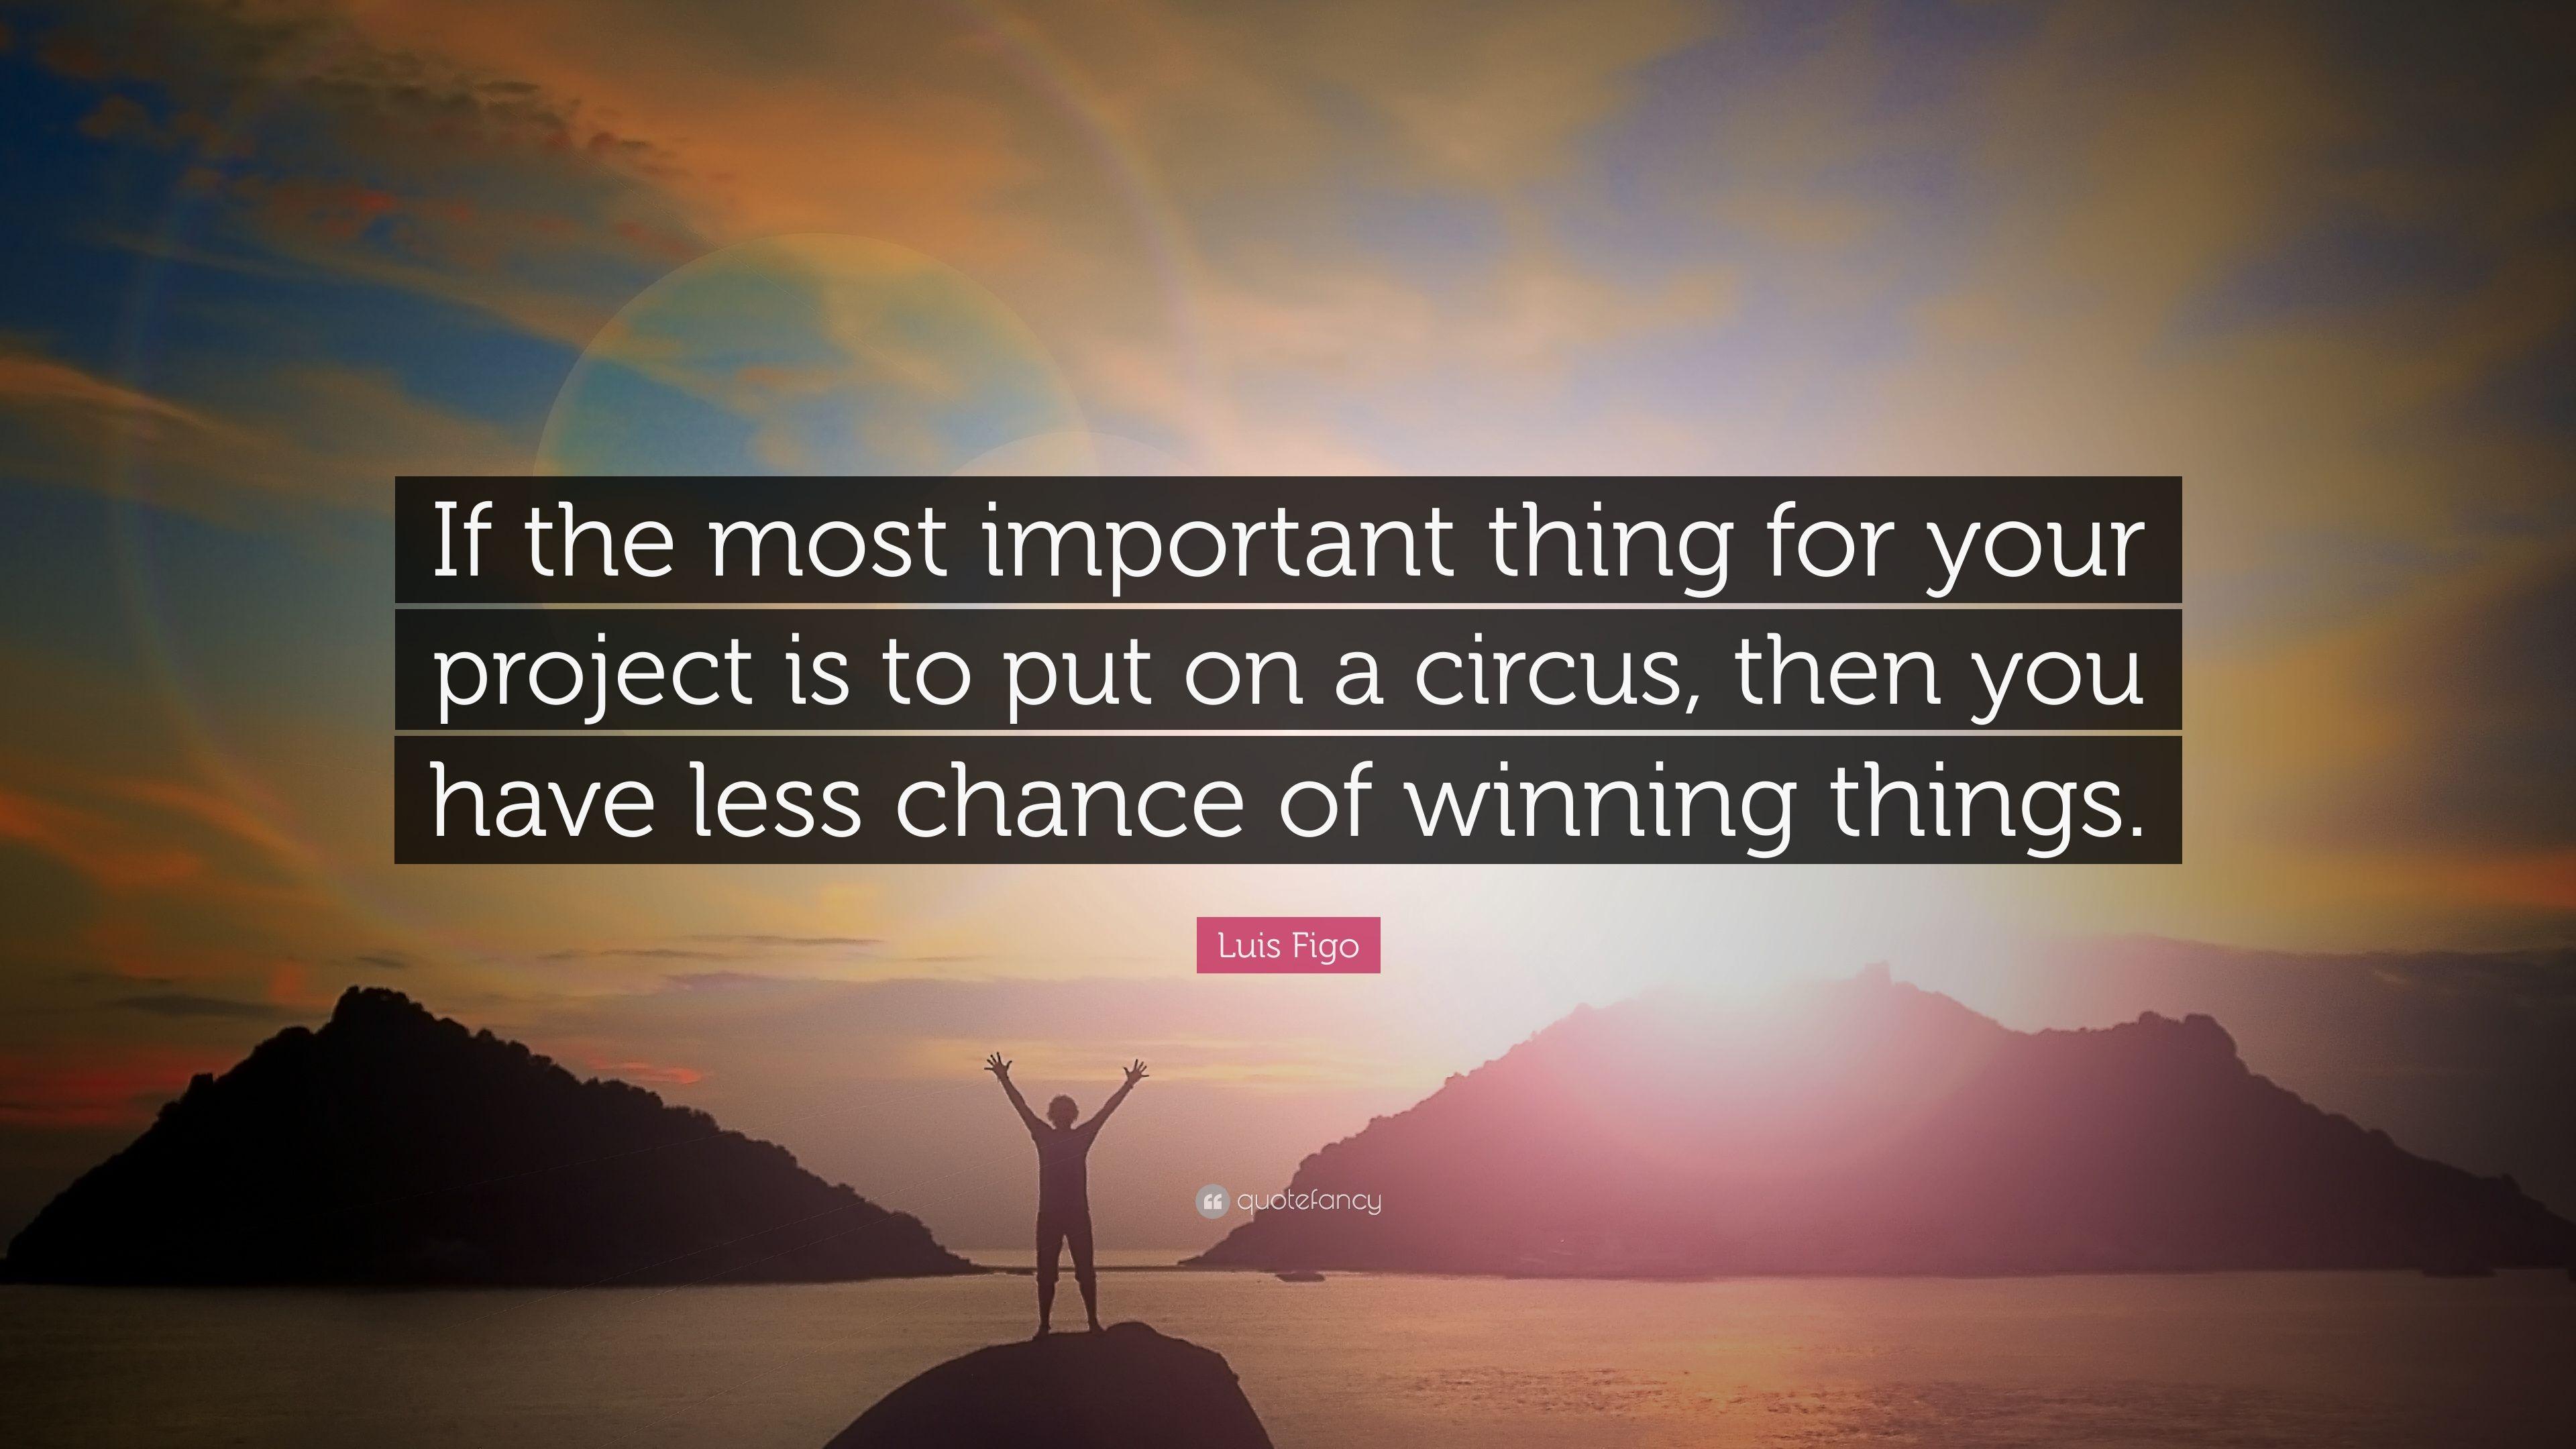 Luis Figo Quote: “If the most important thing for your project is to